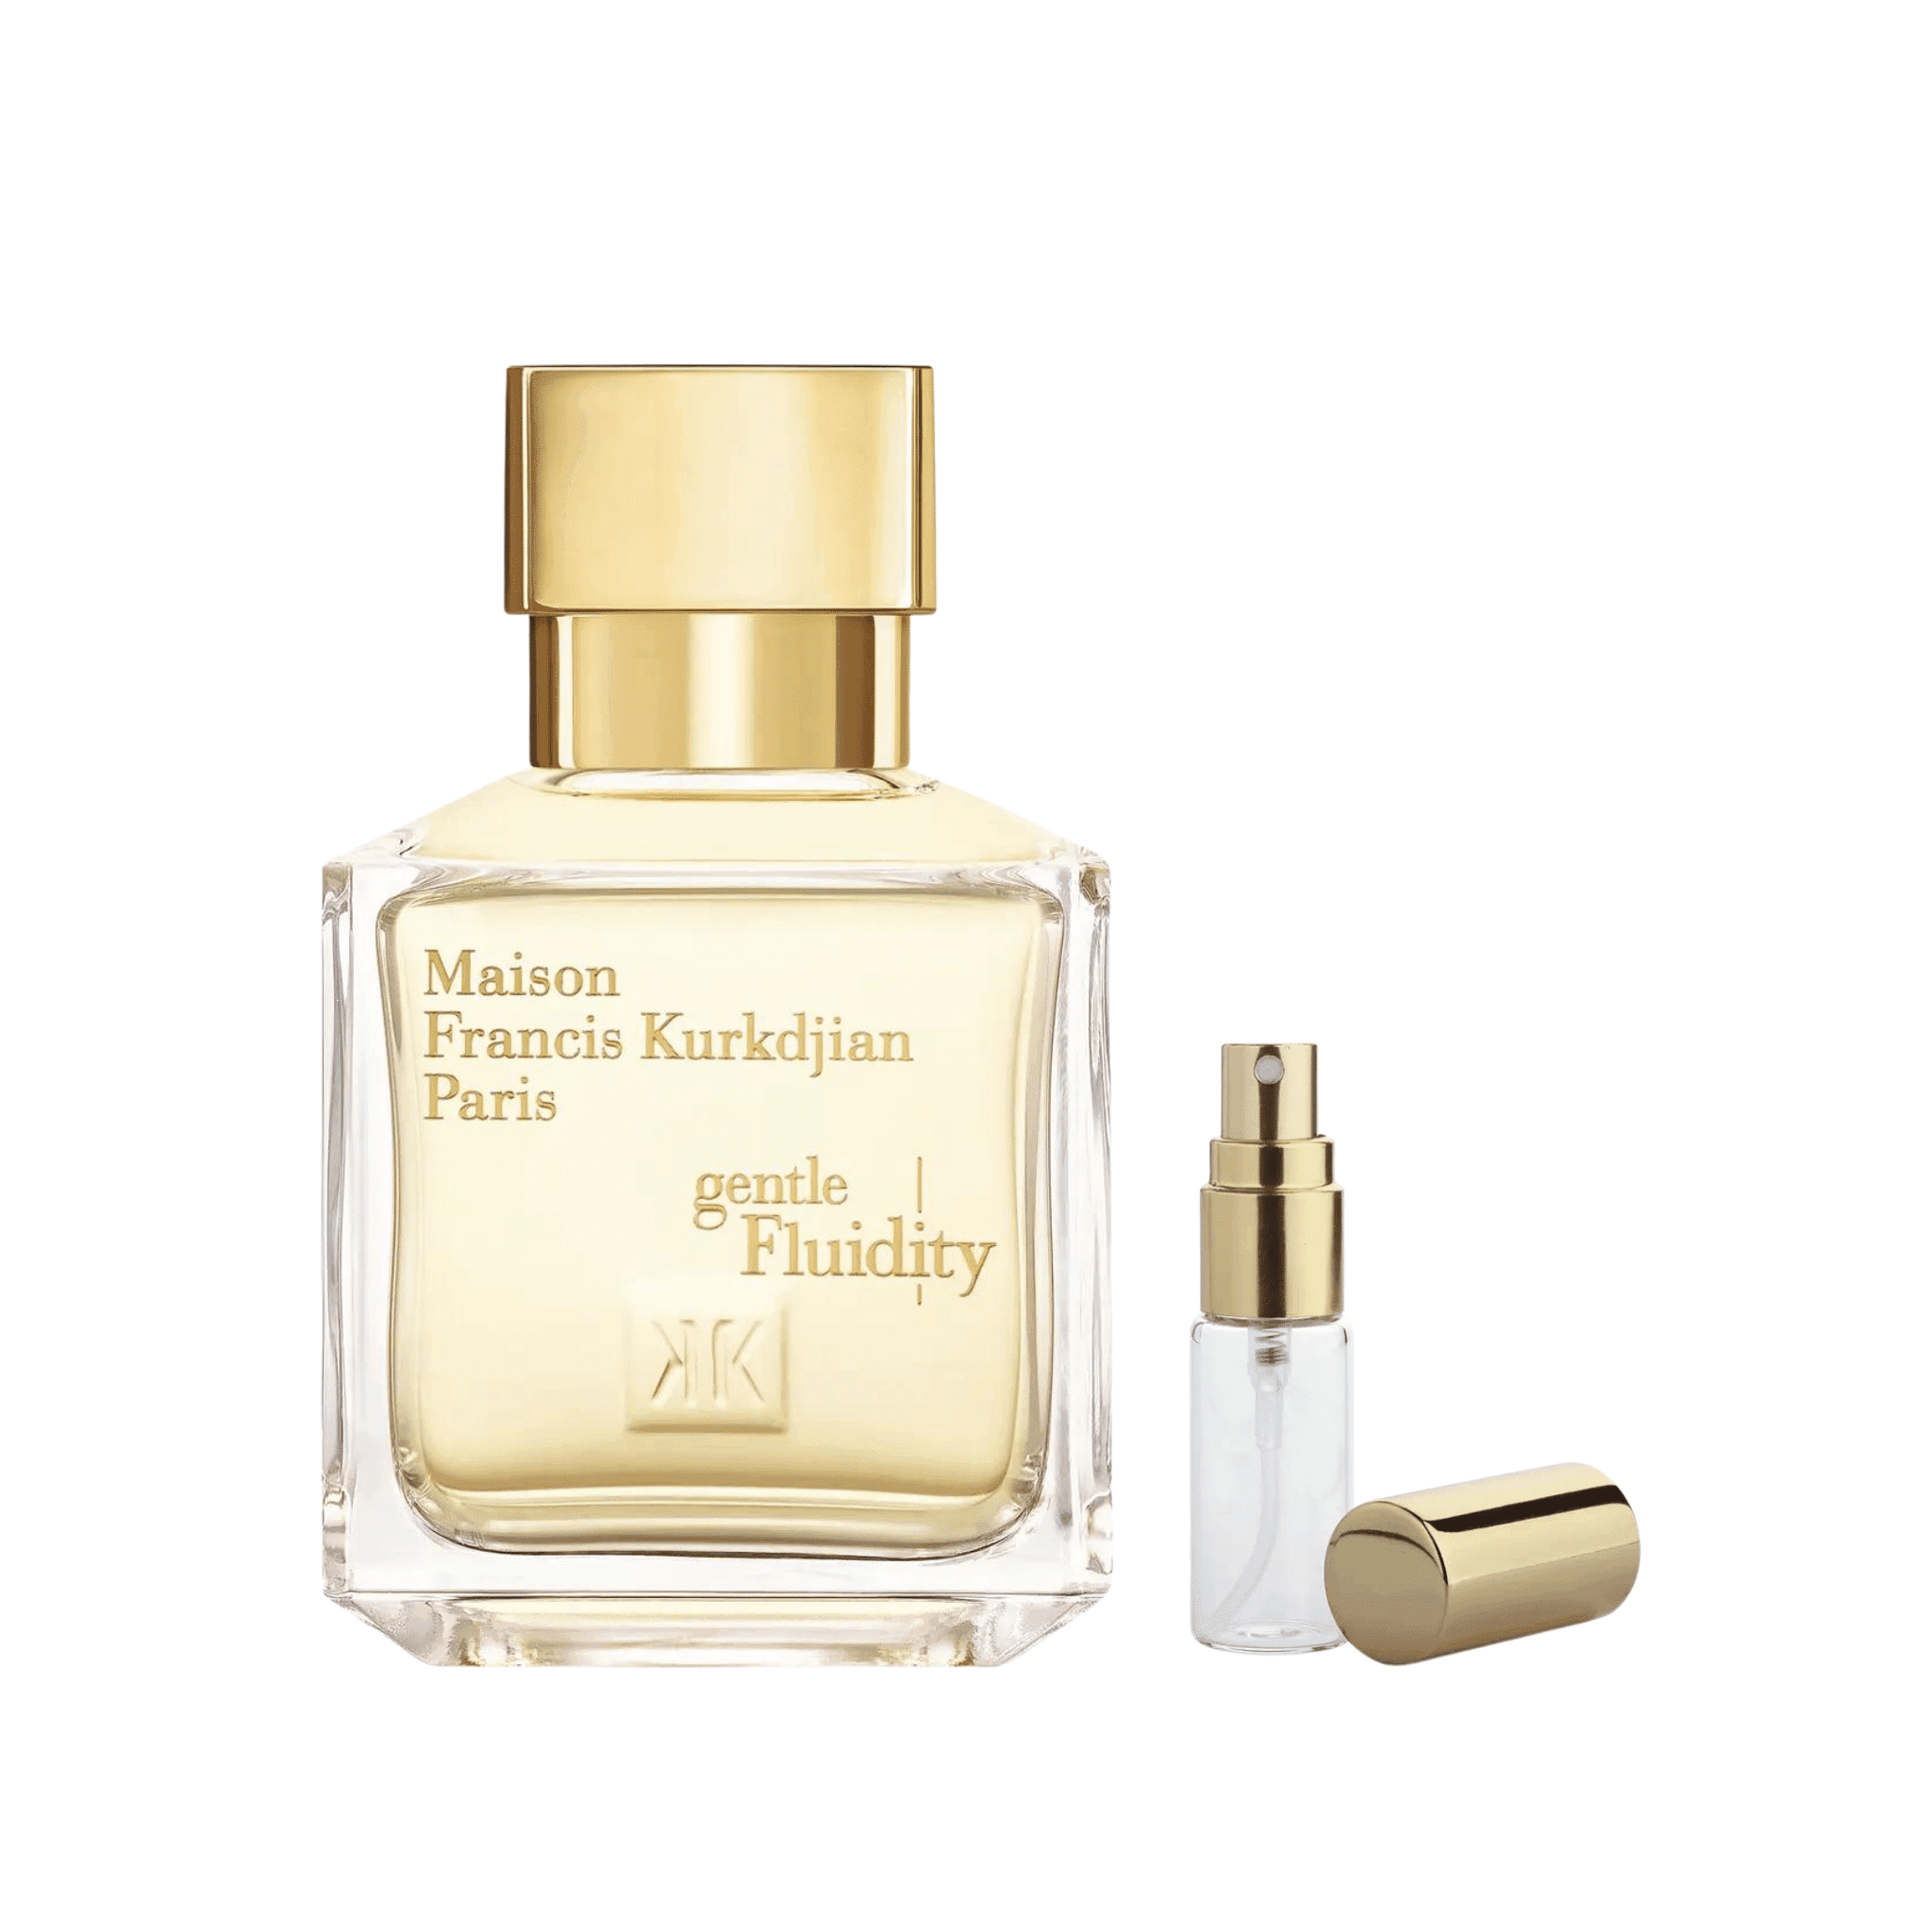 gentle fluidity gold sample size travel decant